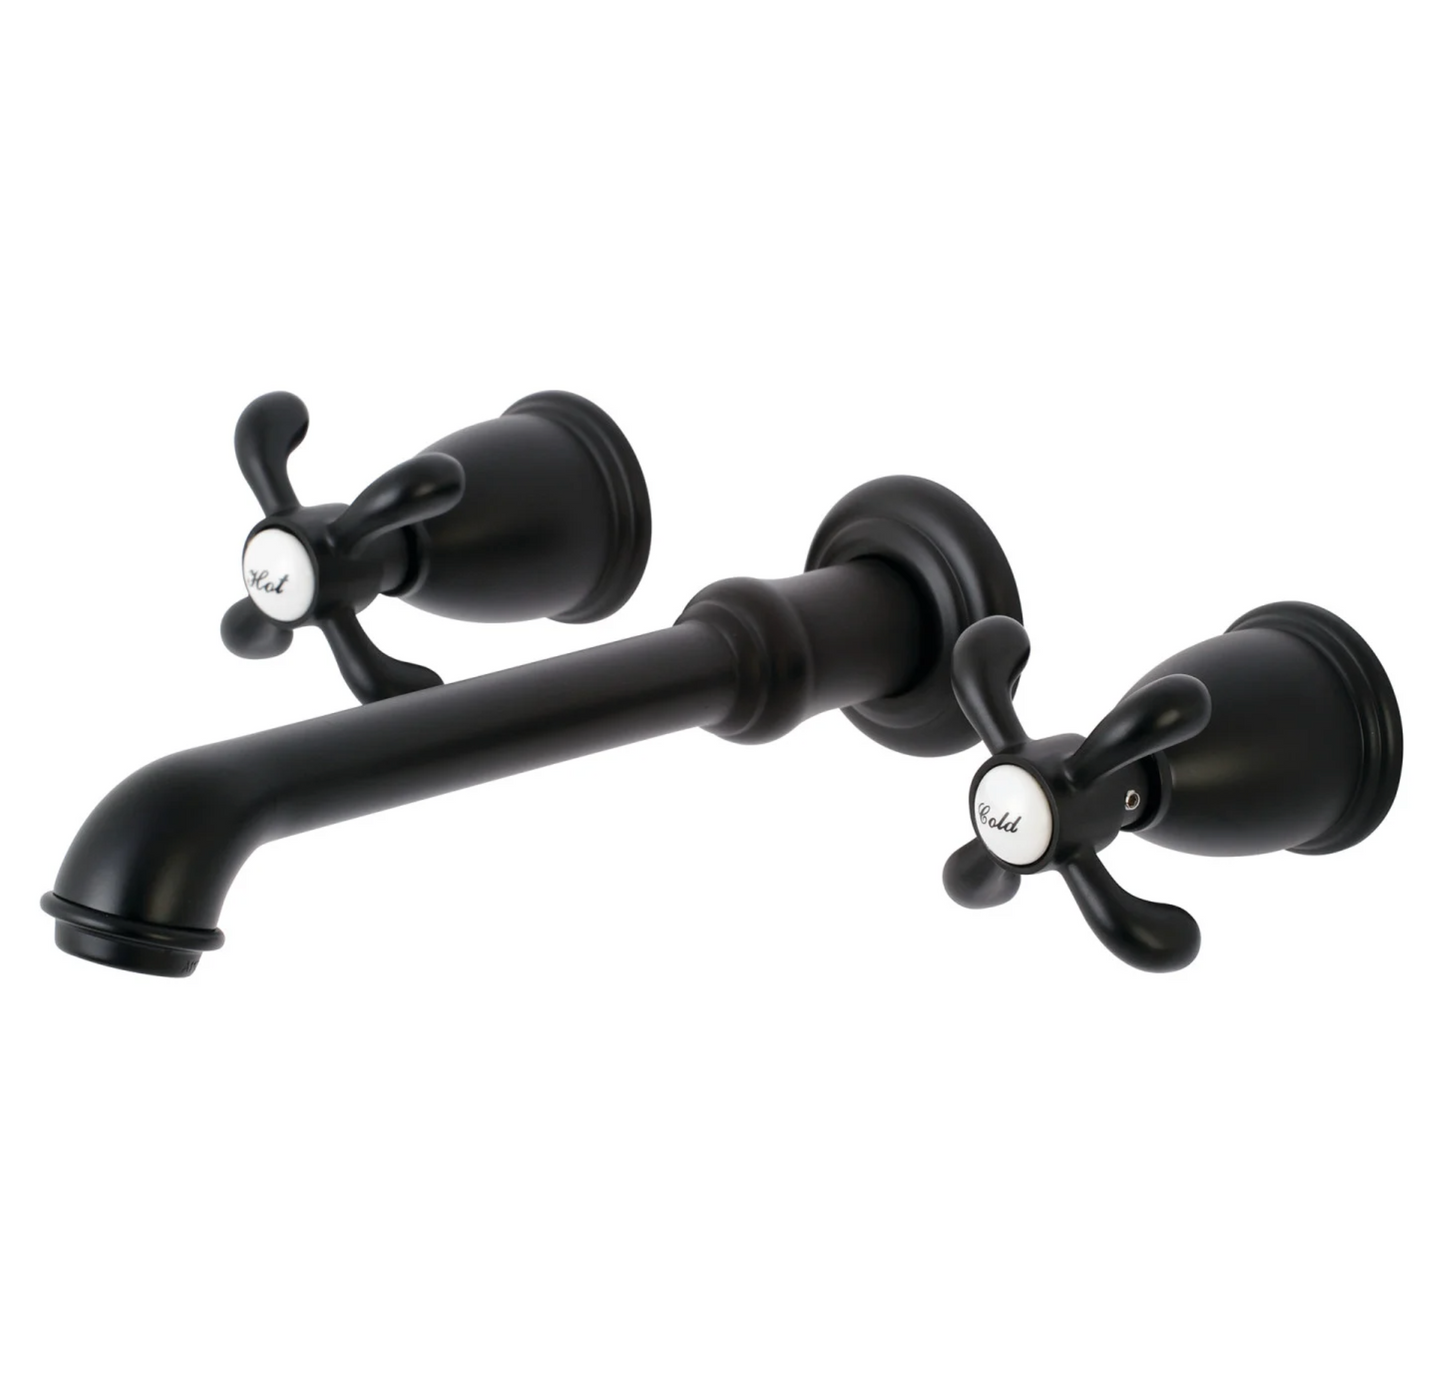 French Country Wall Mount Bathroom Faucet